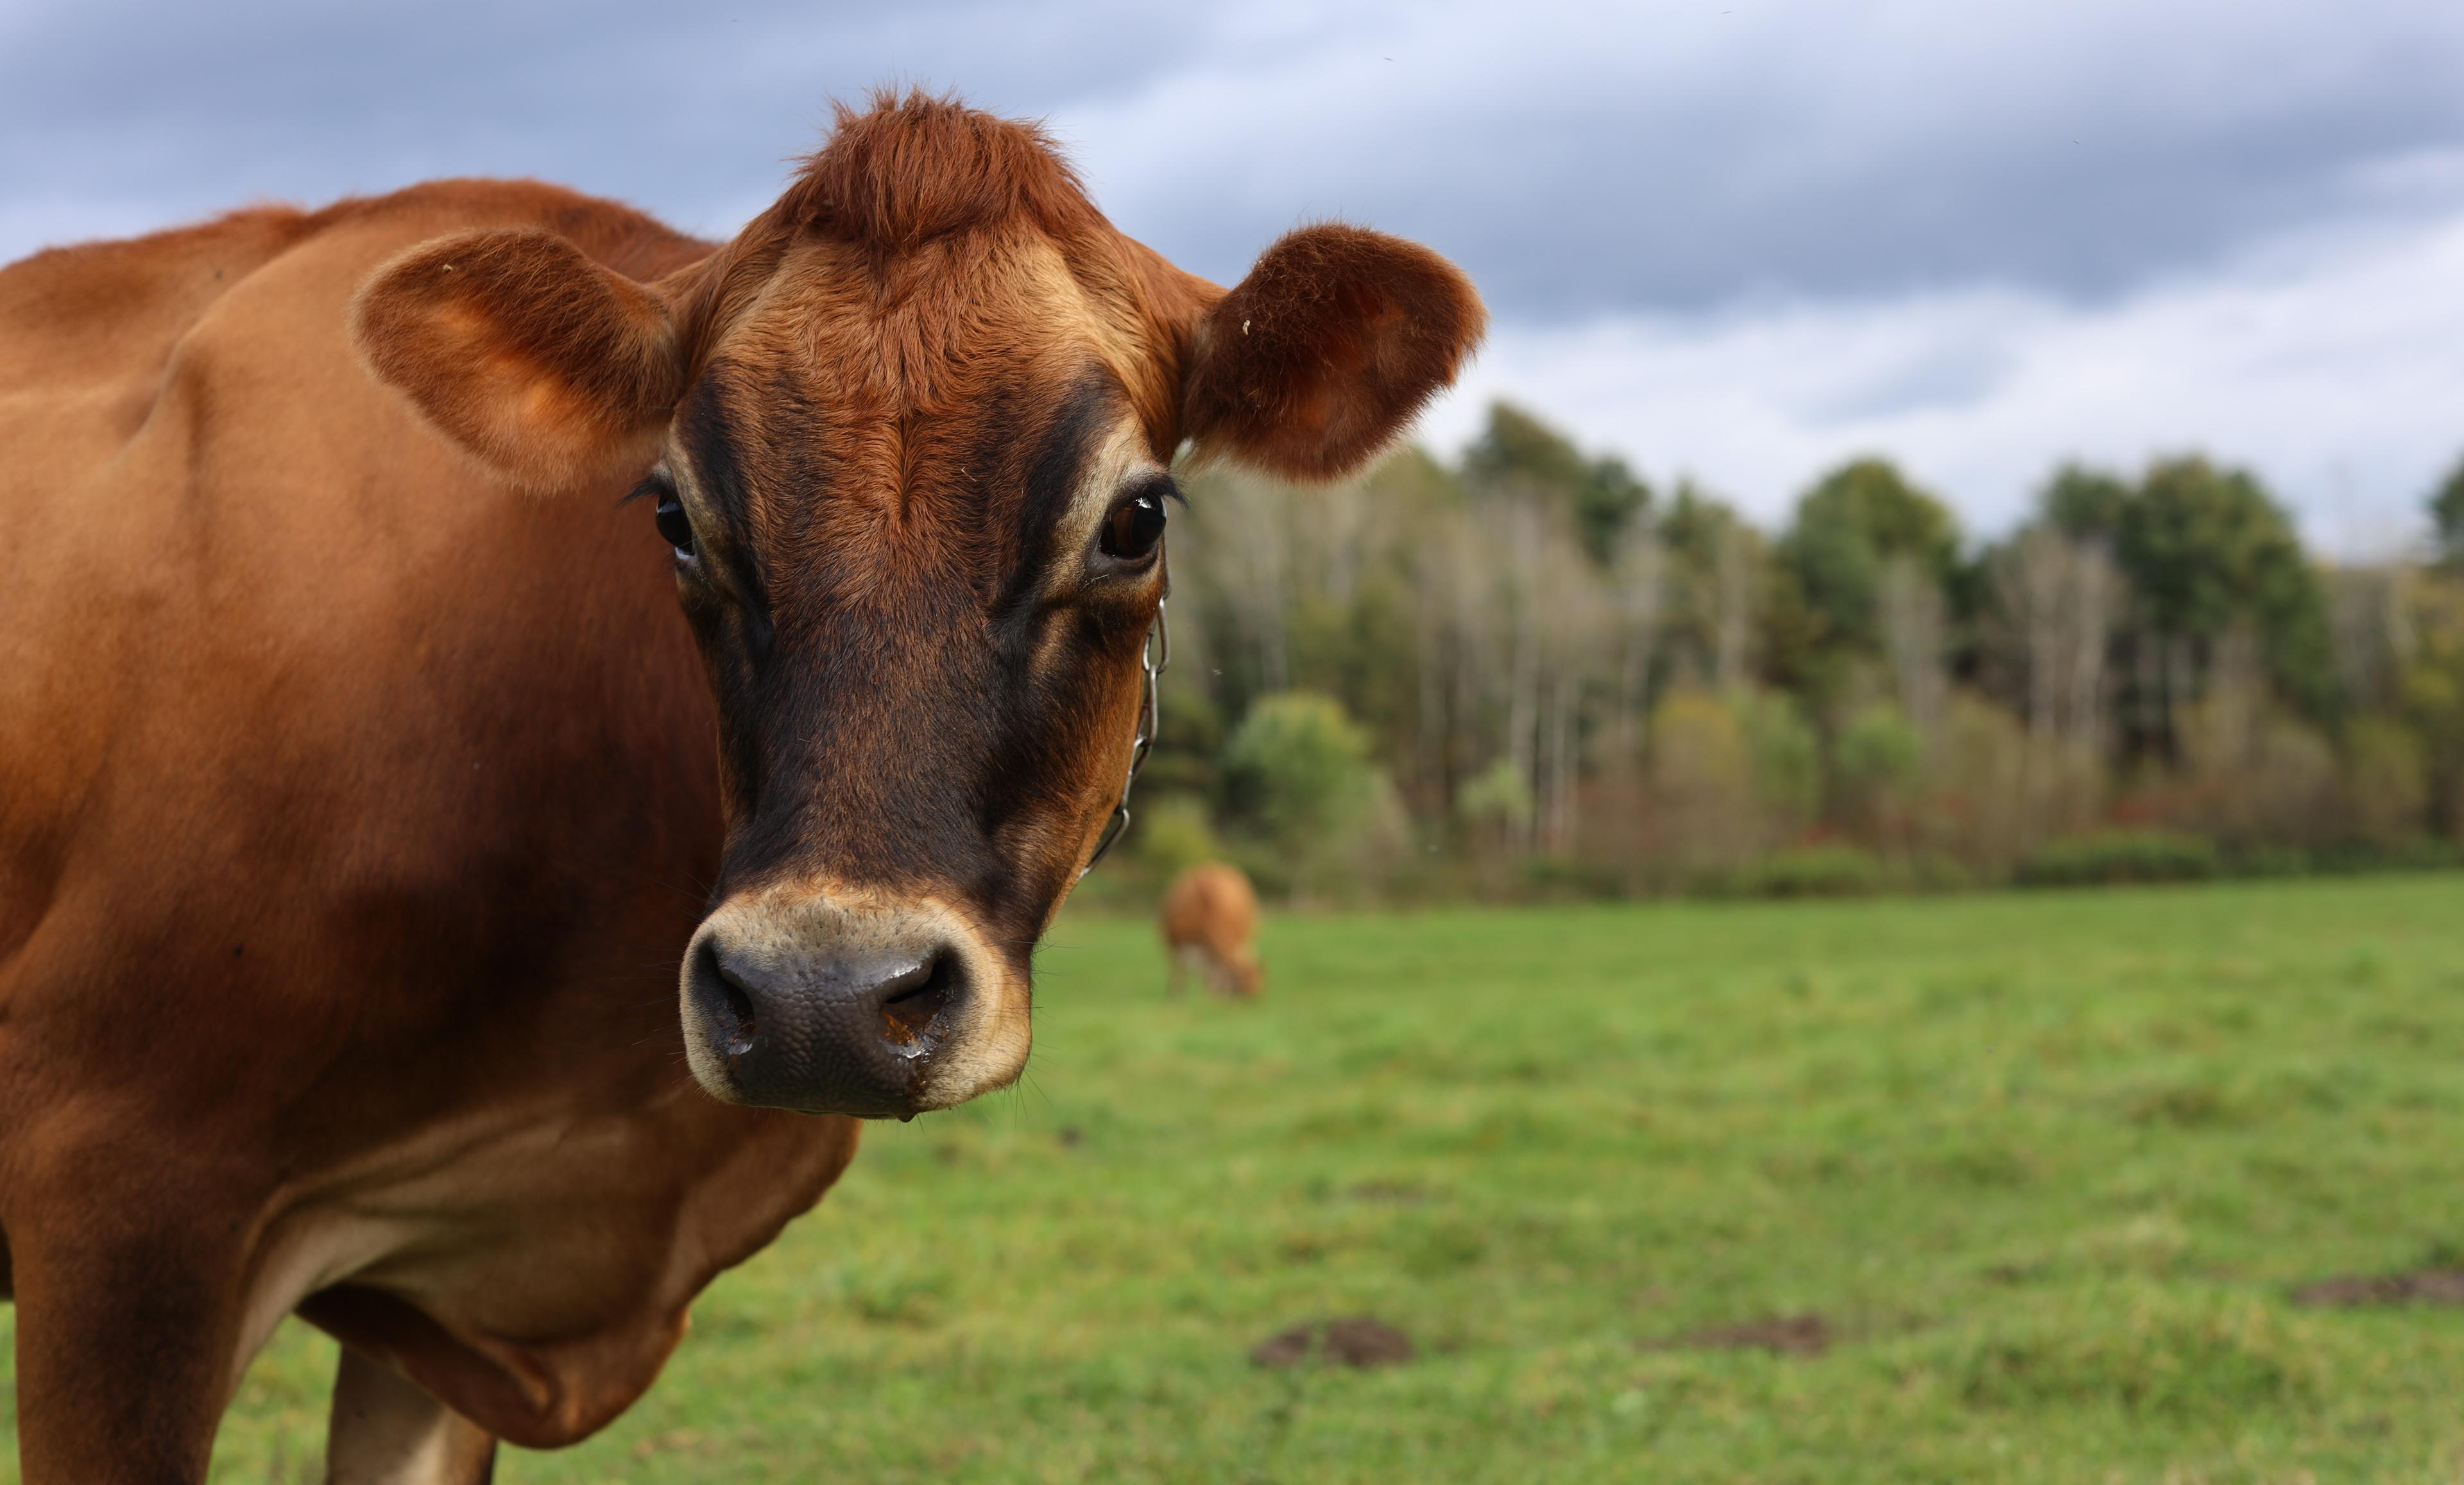 A cow looks at the camera on Kyle Leibold’s dairy farm in Vermont.